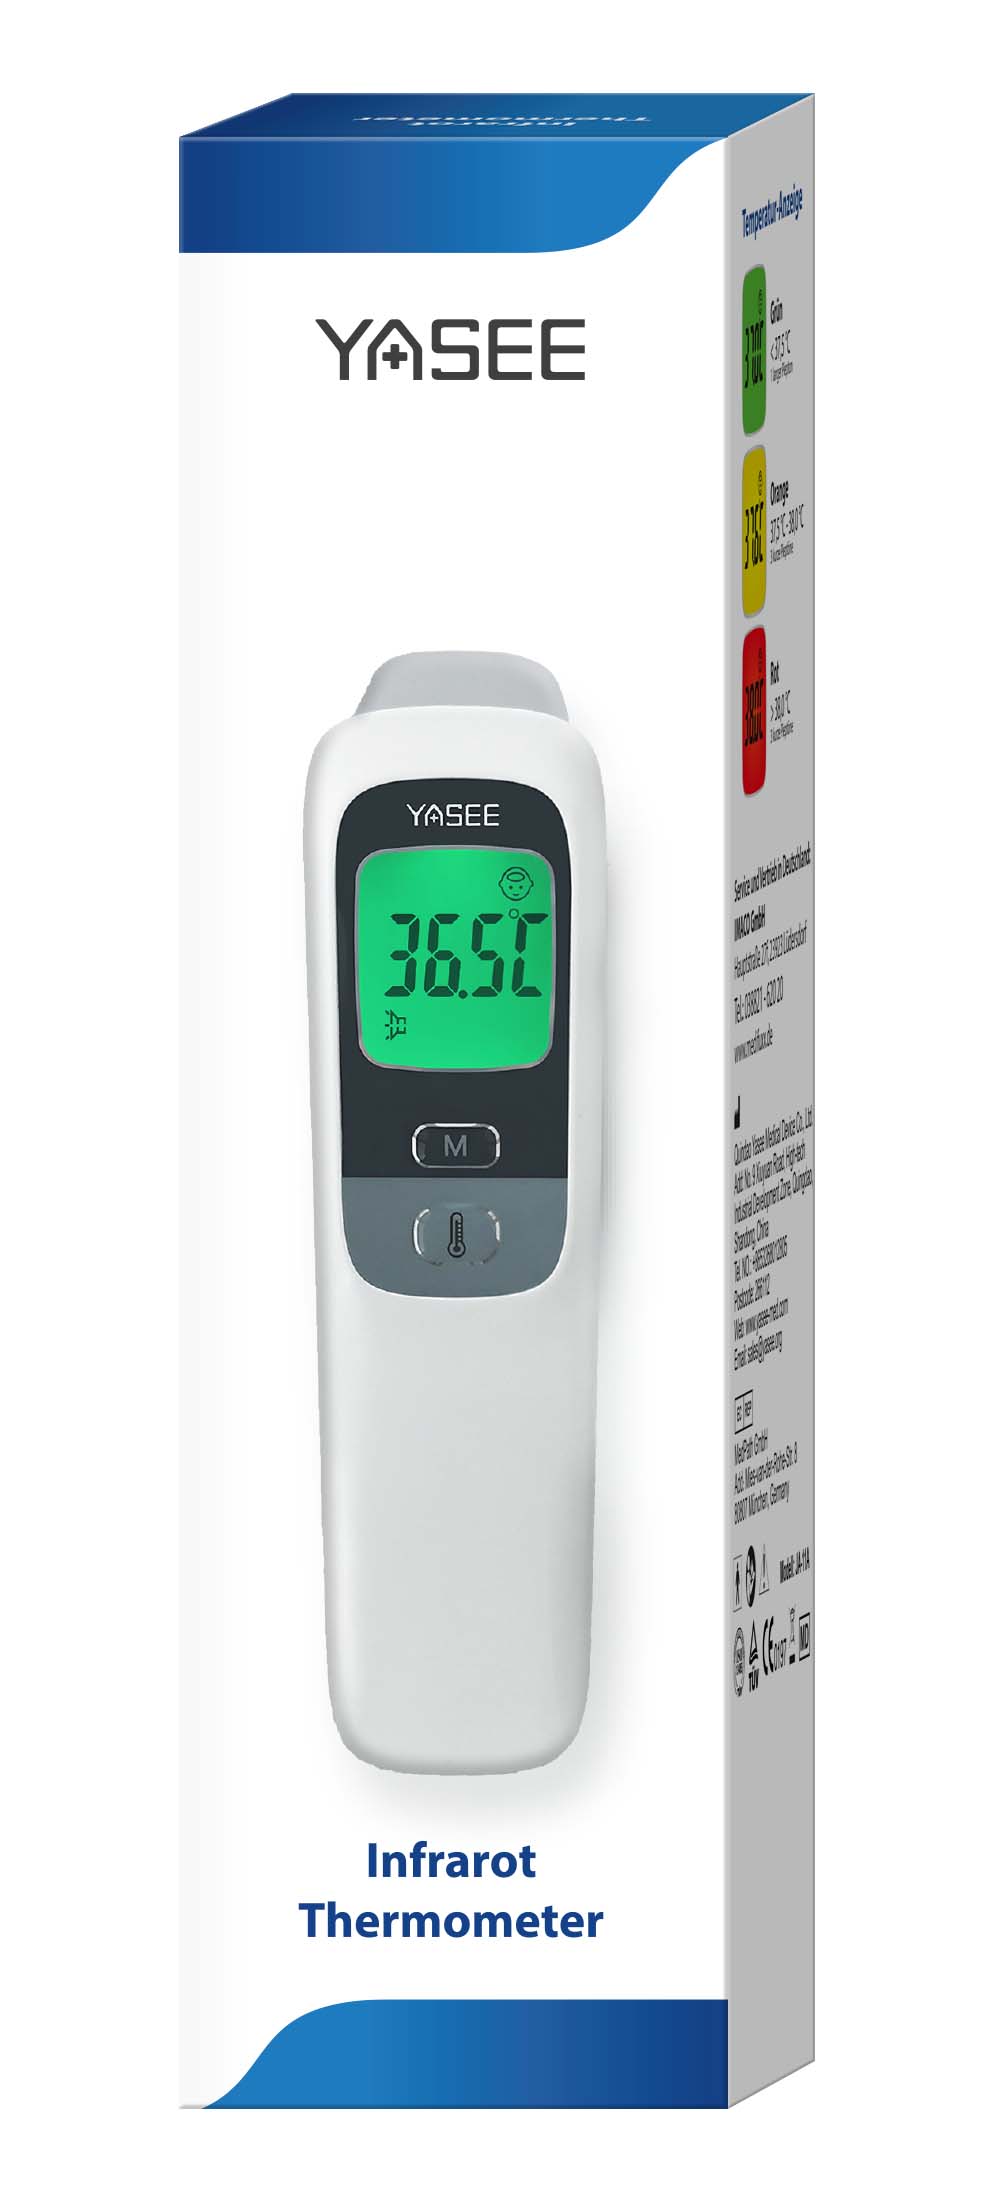 YASEE Infrarot-Thermometer